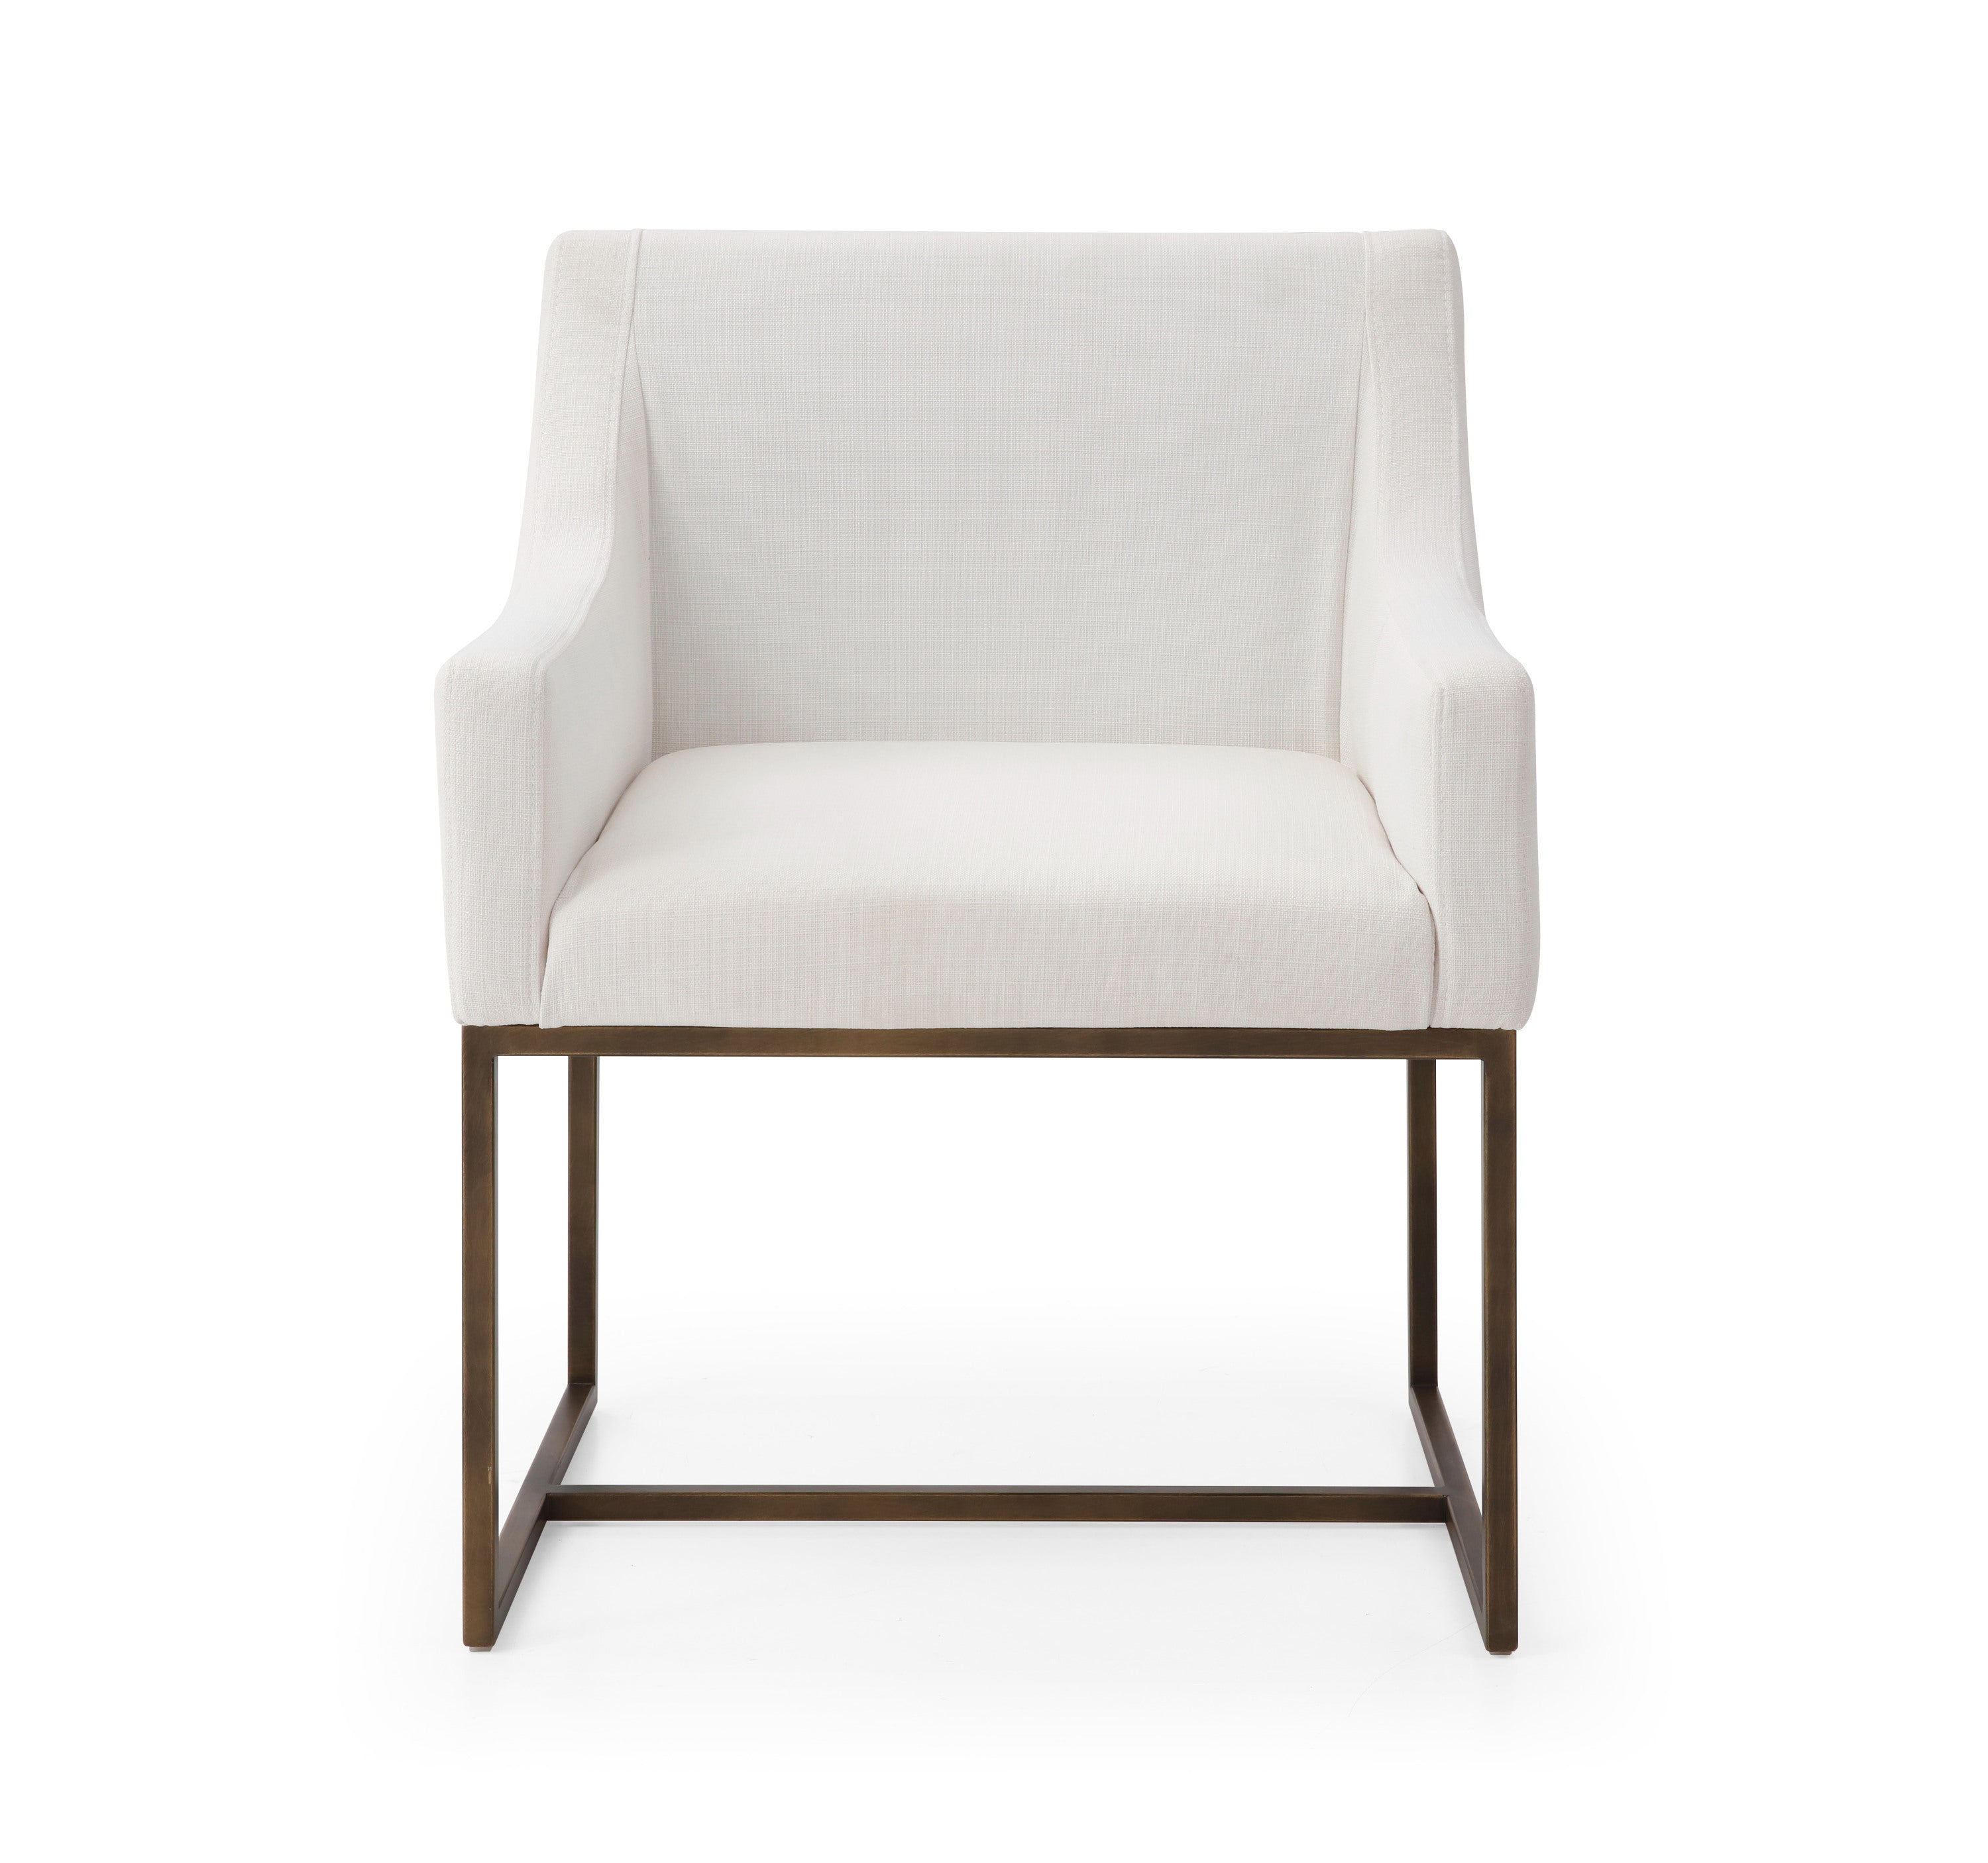 Modern Off White & Copper Antique Brass Dining Chair